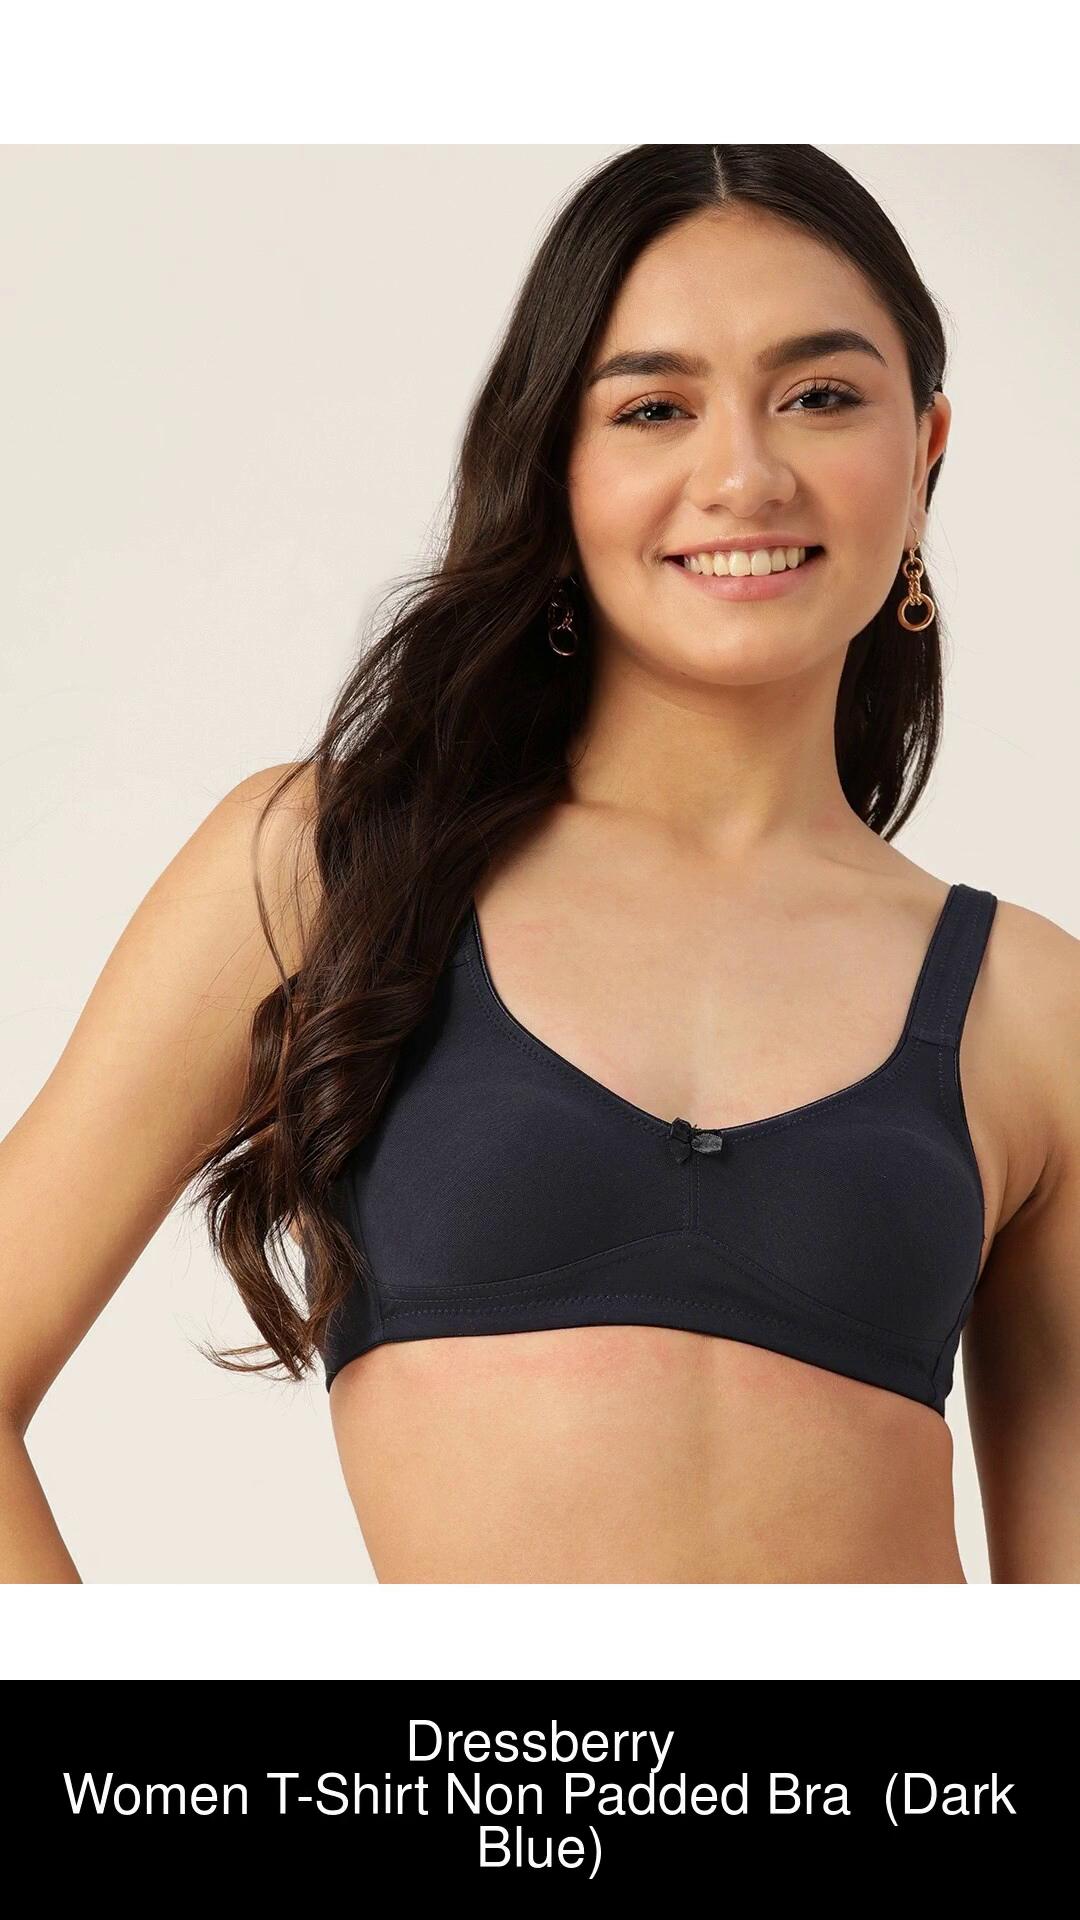 Buy Dressberry Women T-Shirt Non Padded Bra Online at Best Prices in India